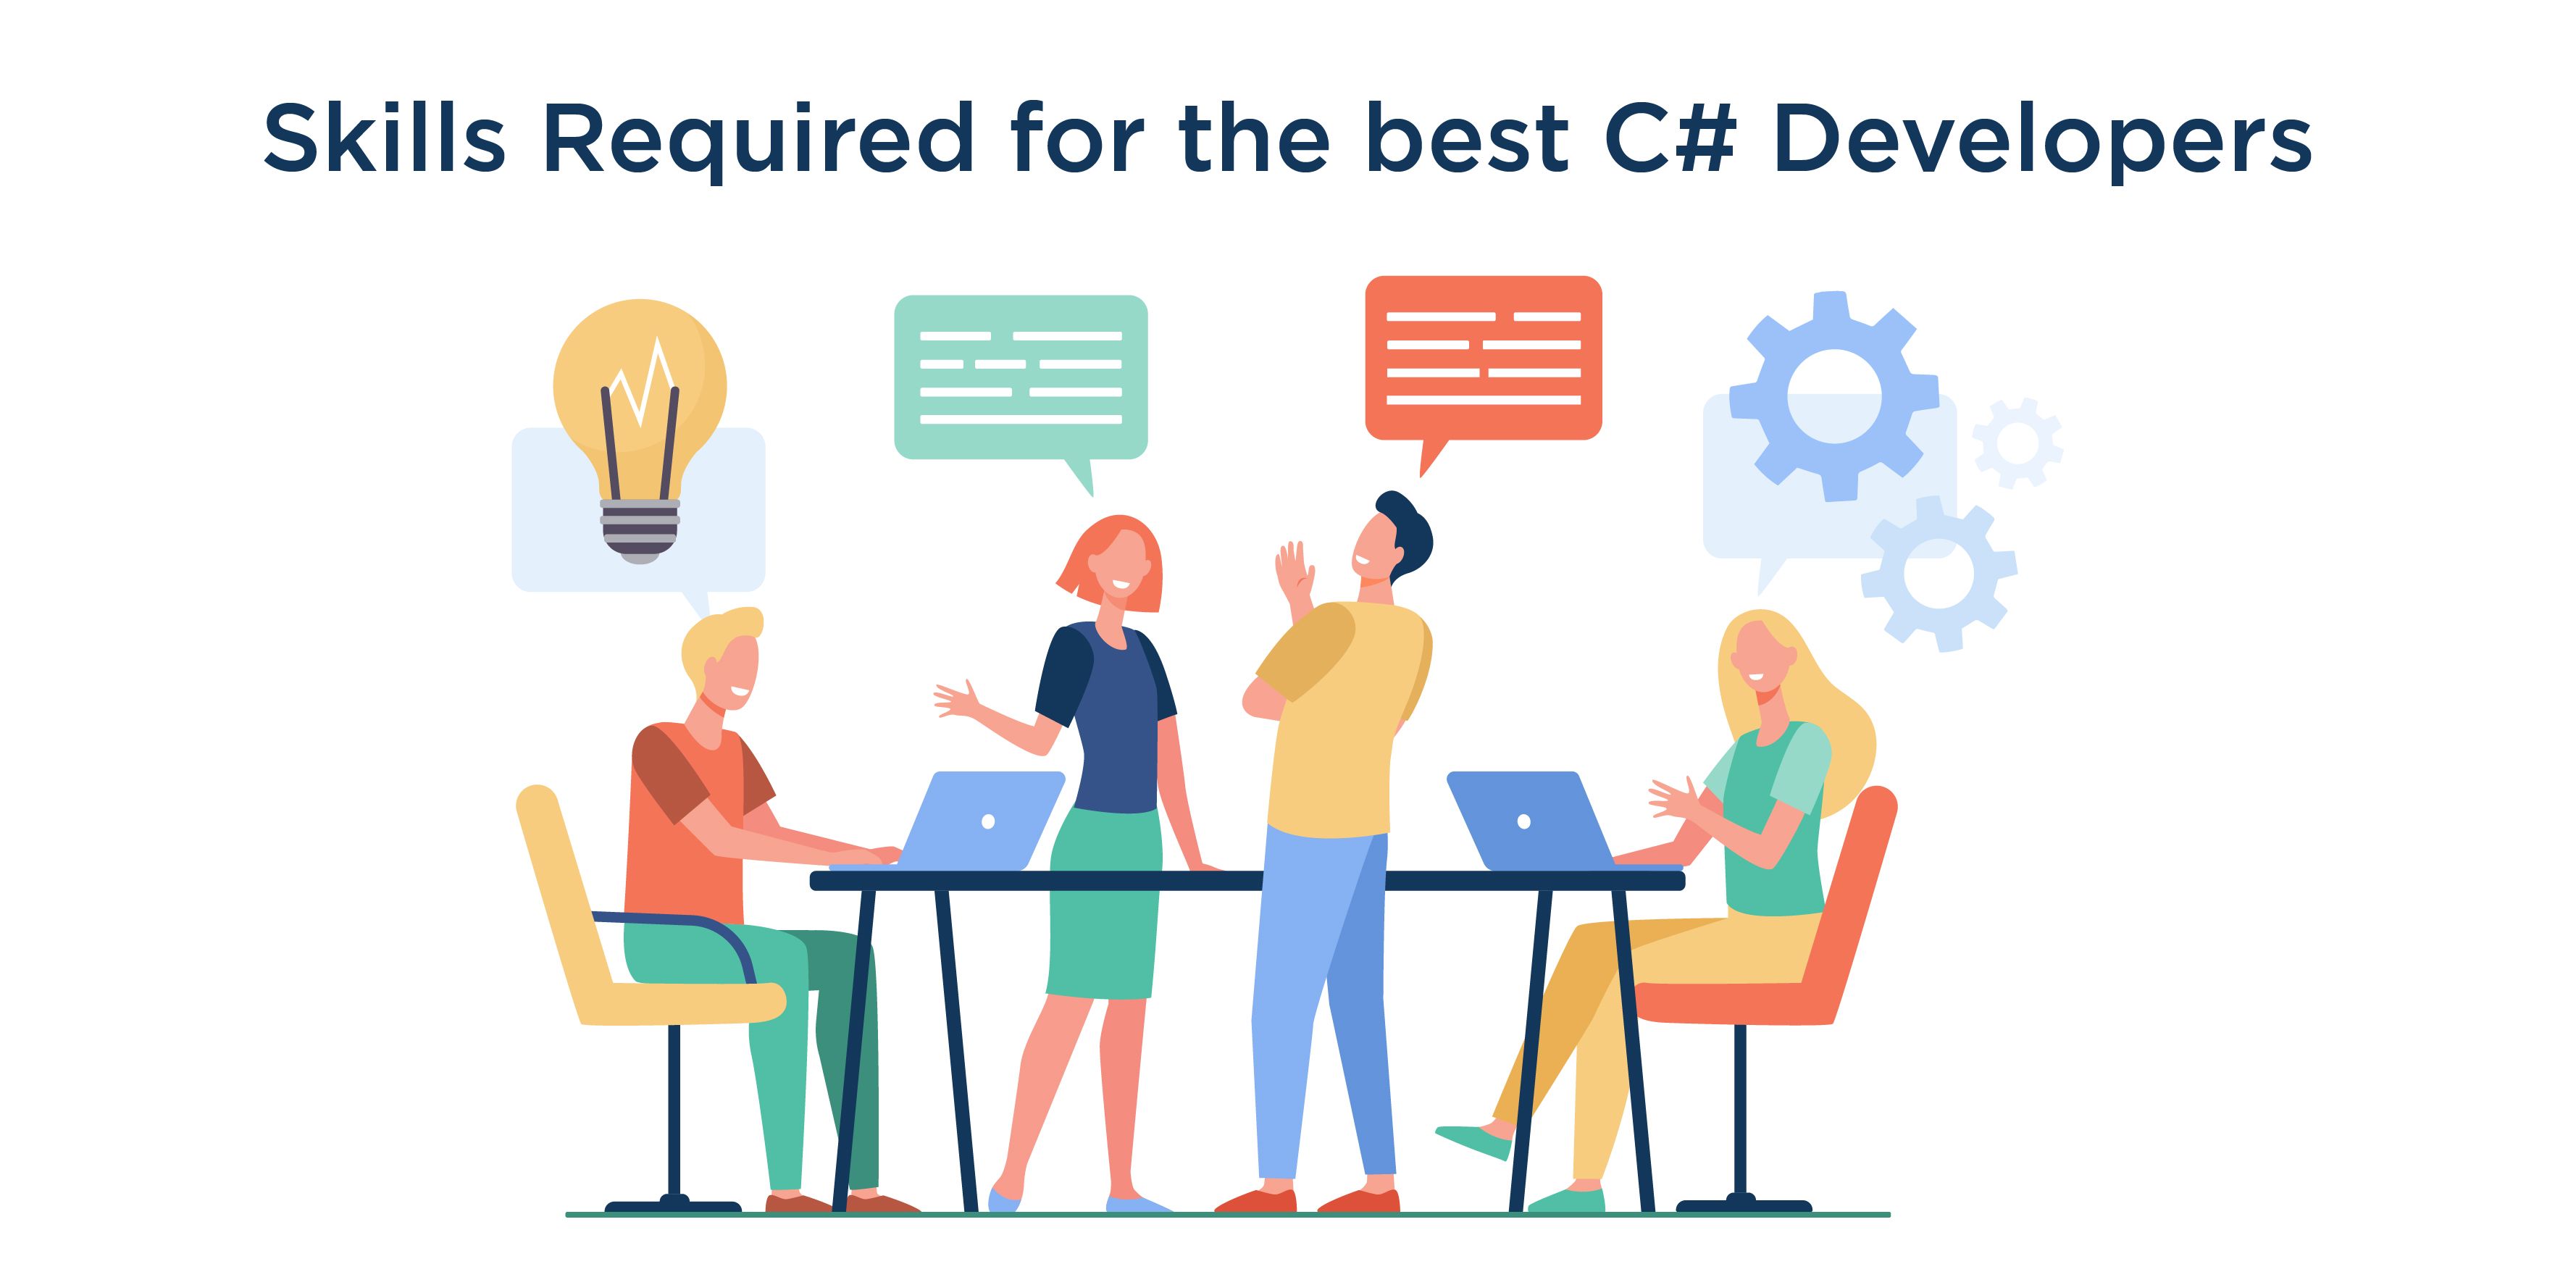 Skills Required for the best CDevelopers.